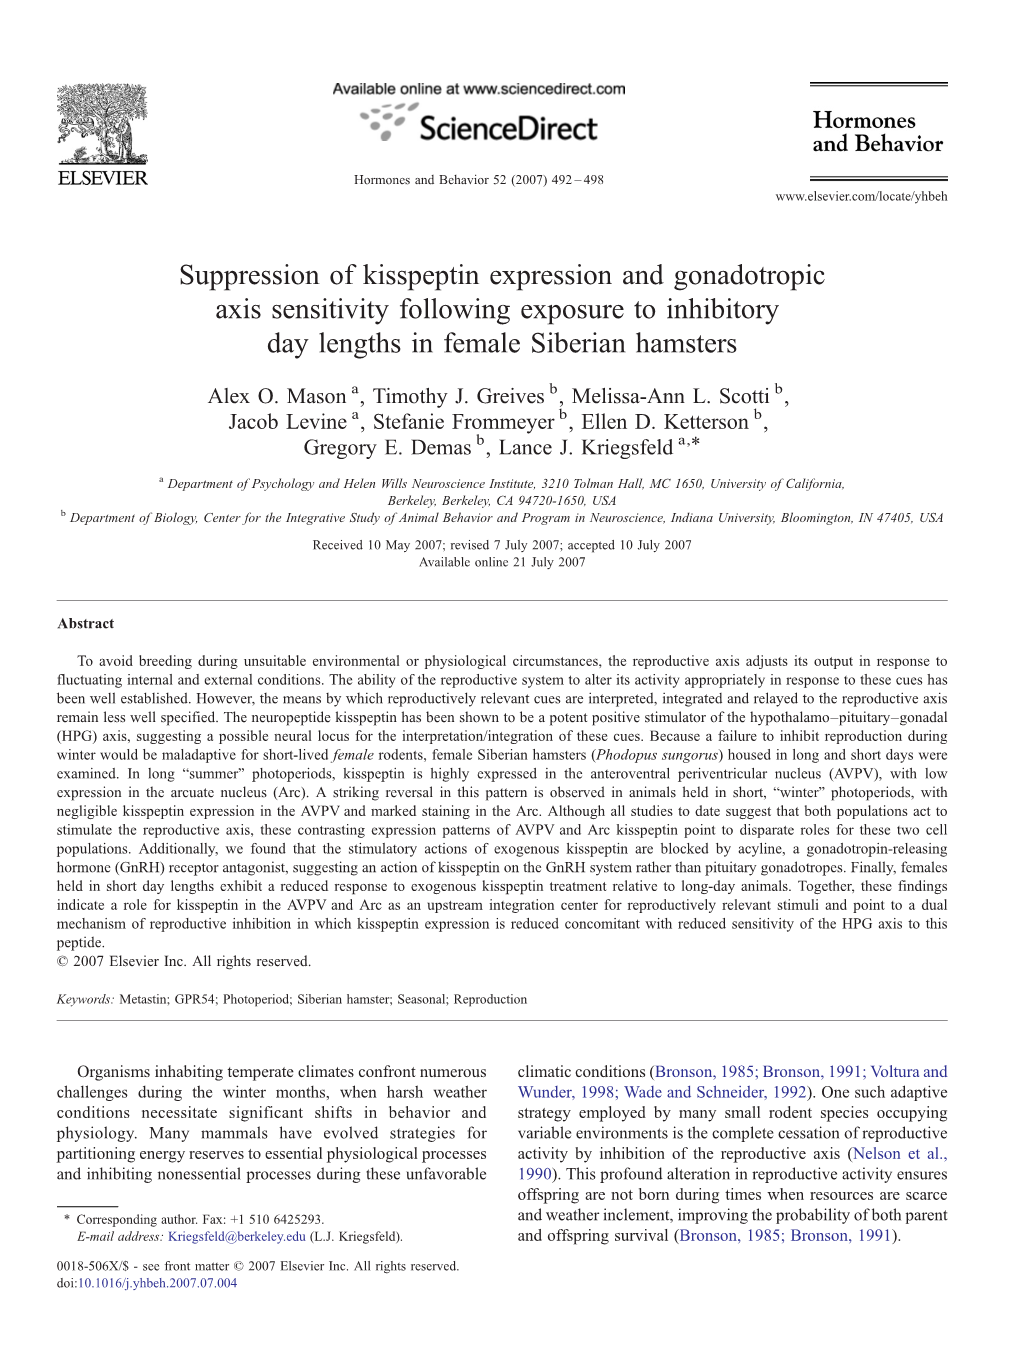 Suppression of Kisspeptin Expression and Gonadotropic Axis Sensitivity Following Exposure to Inhibitory Day Lengths in Female Siberian Hamsters